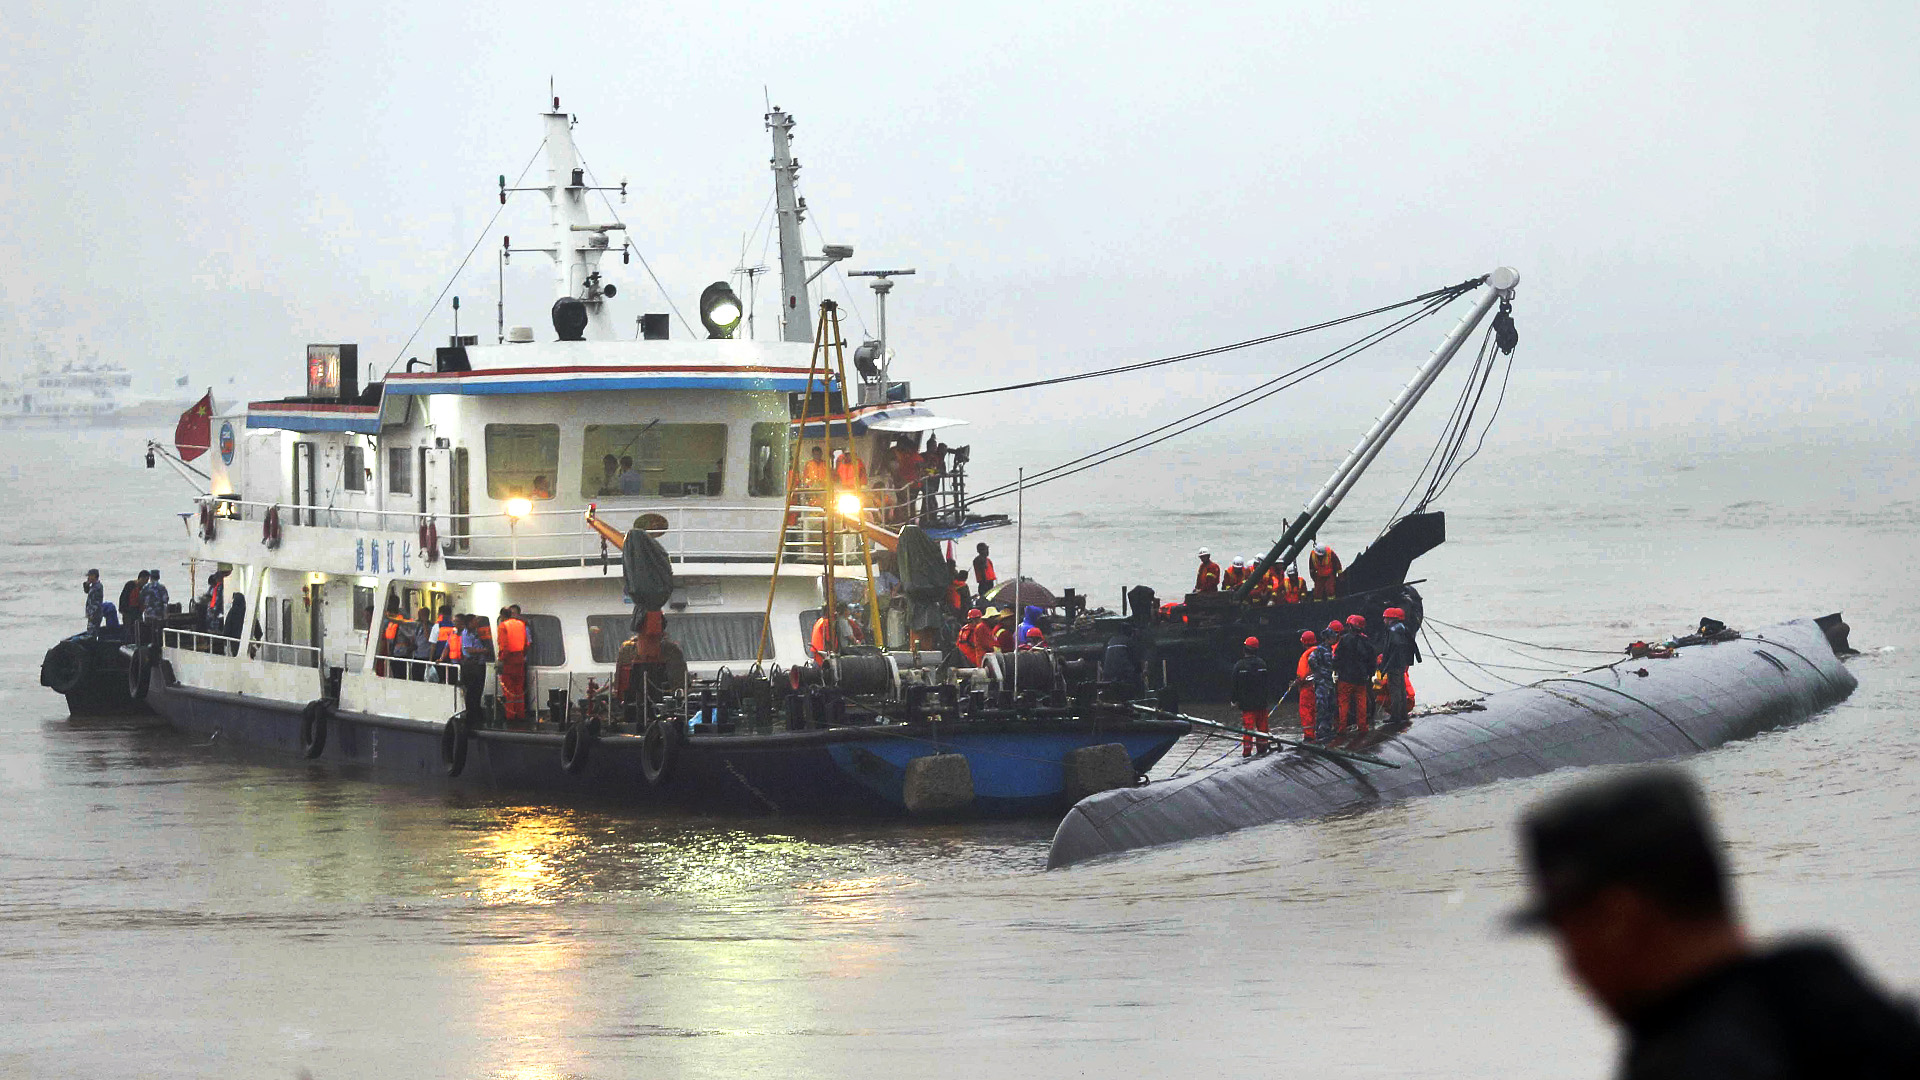 Rescuers search for those still missing after the Dongfangzhixing, or Eastern Star, capsized in China's Yangtze River. Photo: Xinhua